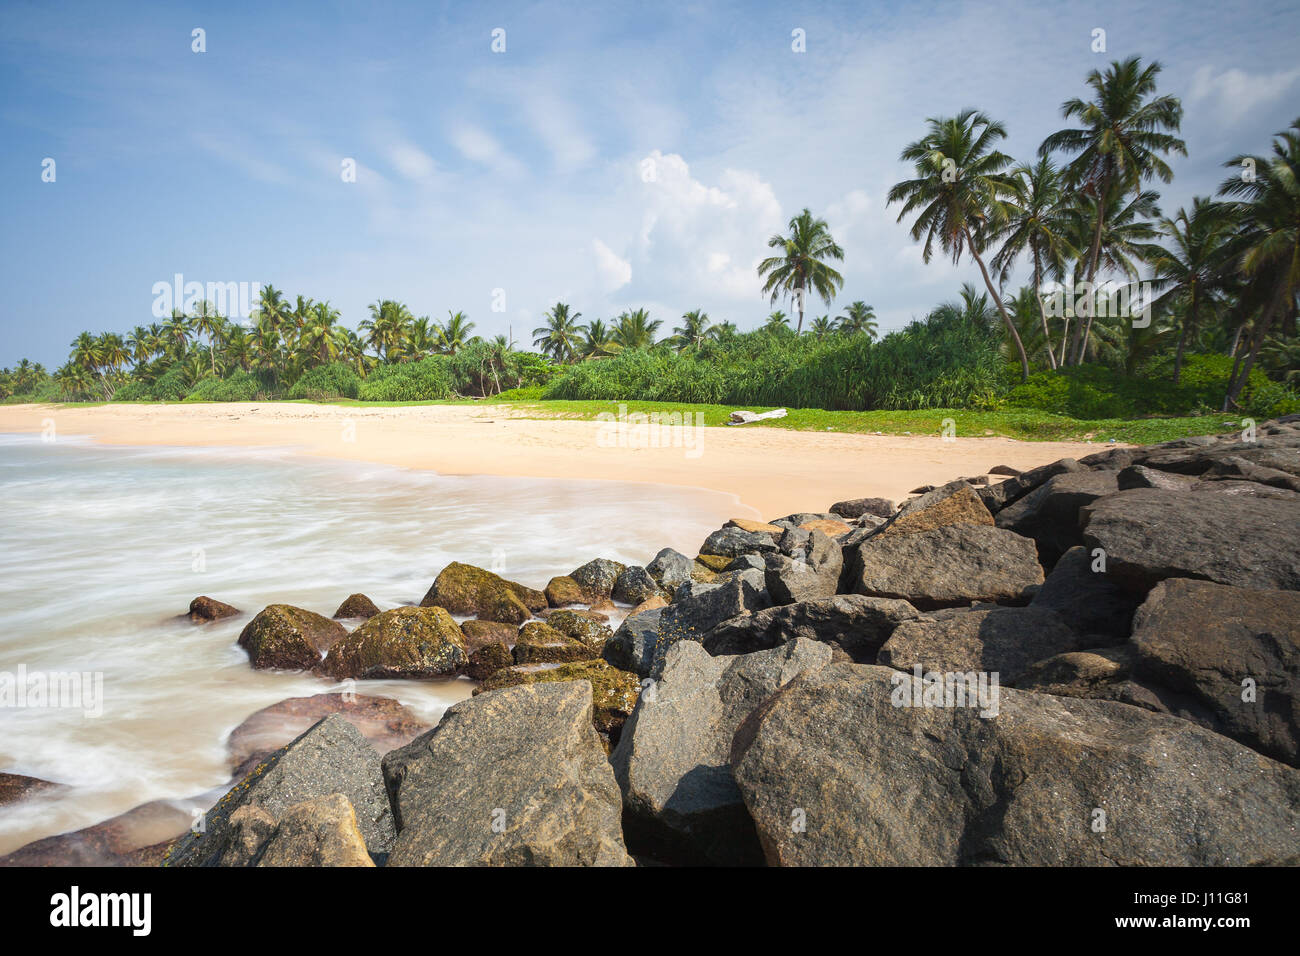 Great and beautiful place in paradise. Indian ocean with golden sand and palms in Sri Lanka. A wonderful nature landscape of a beach scene in Sri Lank Stock Photo